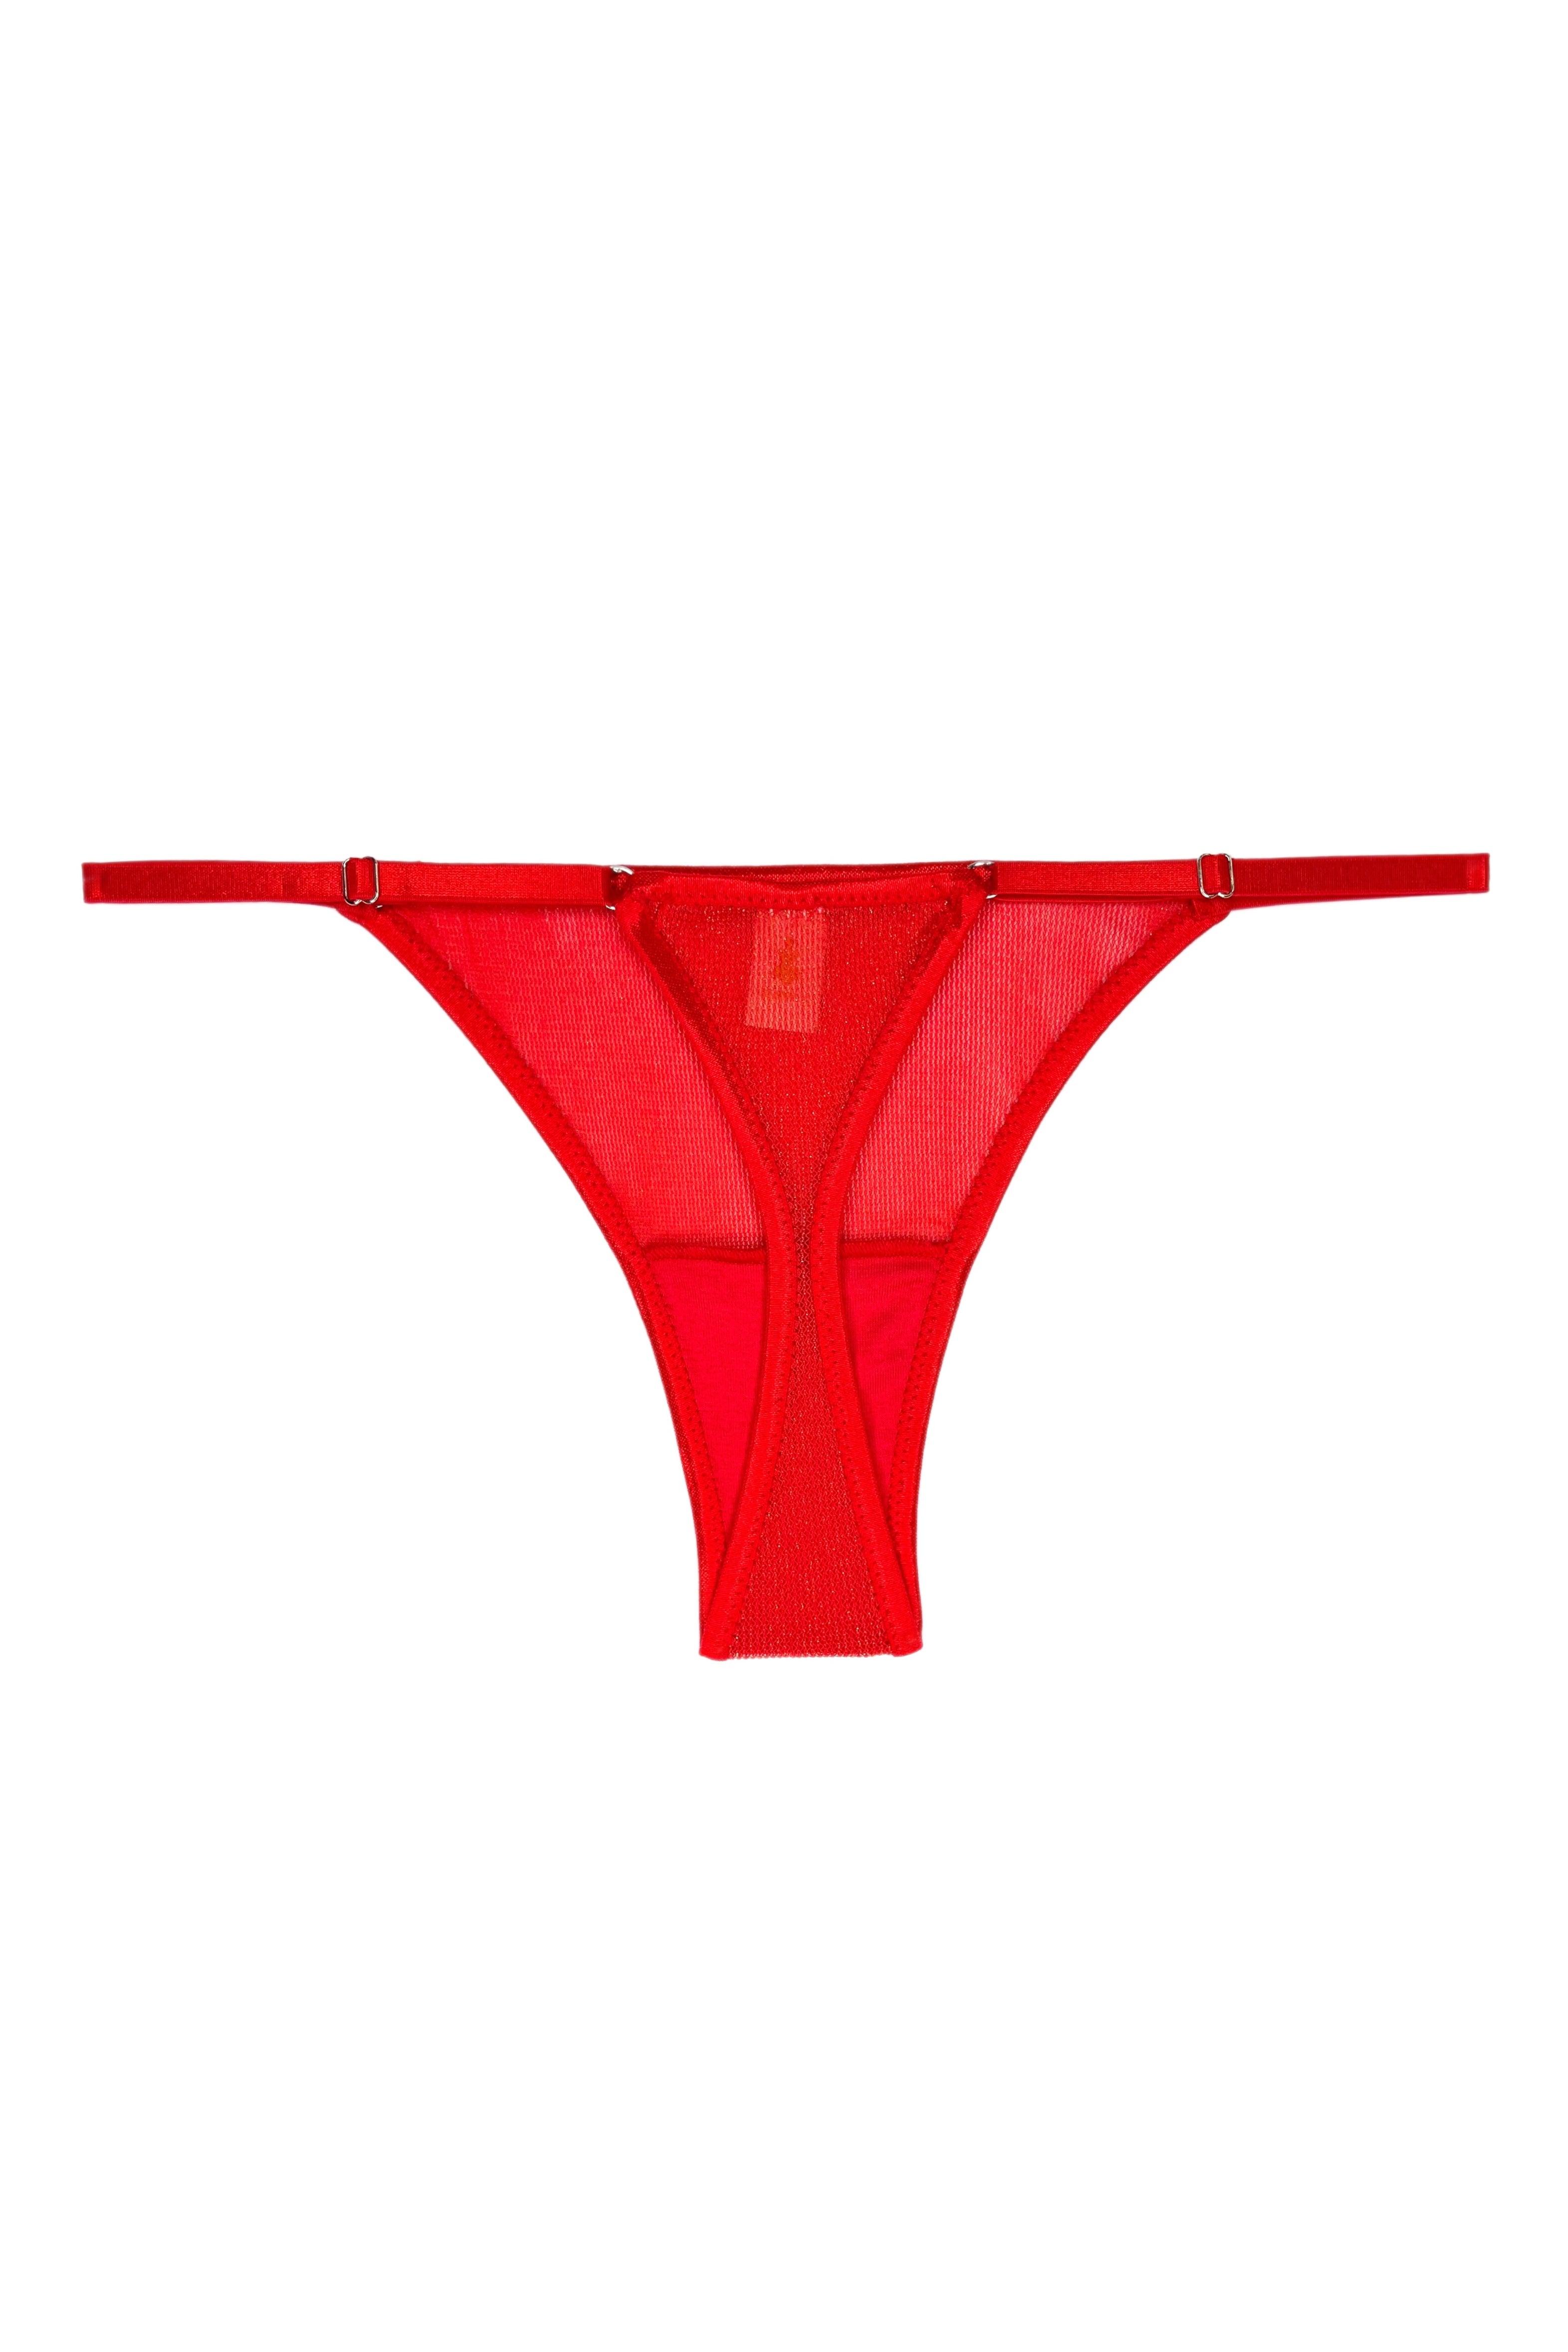 Wildly Gold red ultra thongs - yesUndress